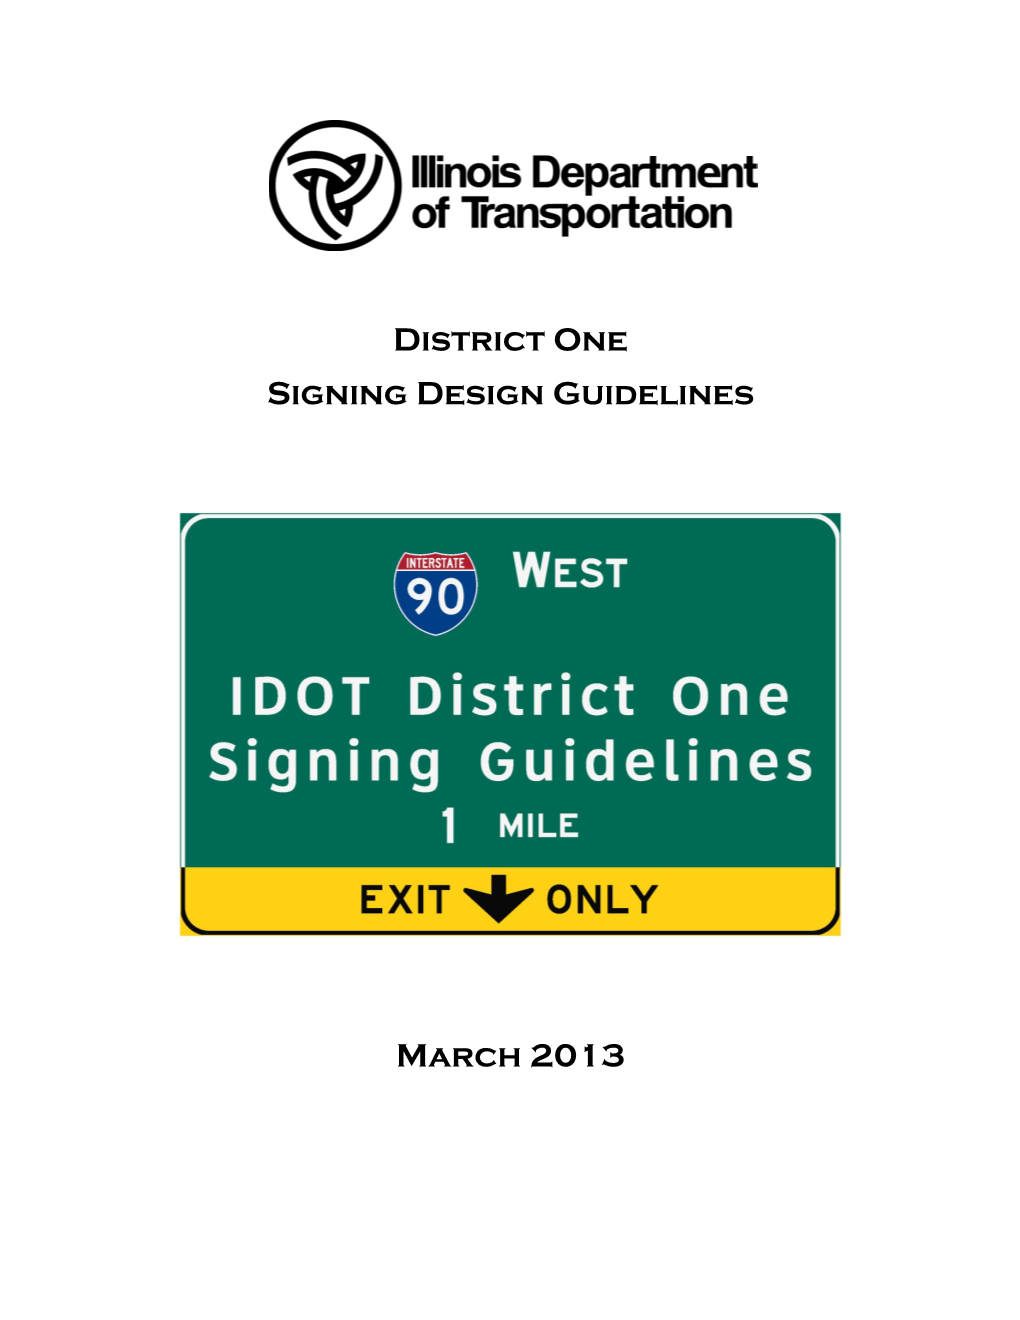 District One Signing Design Guidelines March 2013